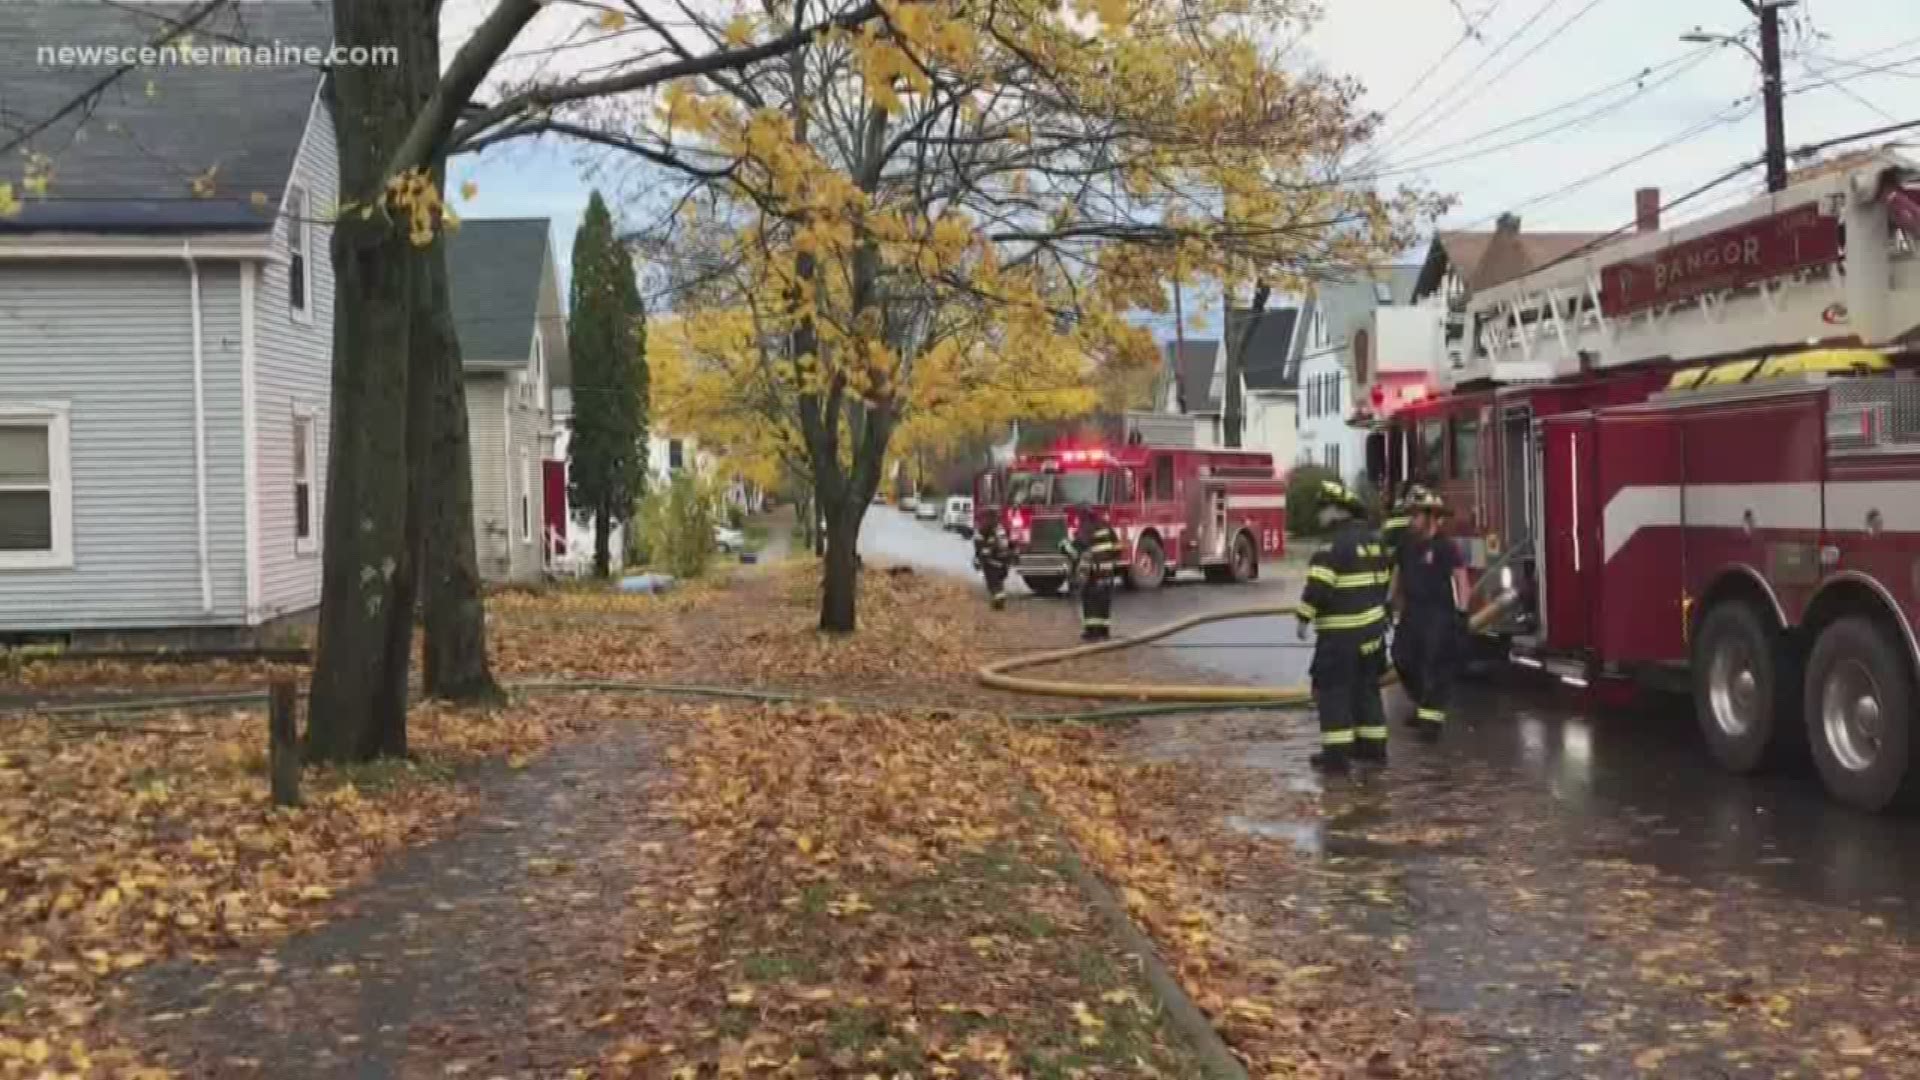 Just before eight Friday morning… reports of smoke and a fire alarm brought Bangor fire crews to 258 Essex Street.